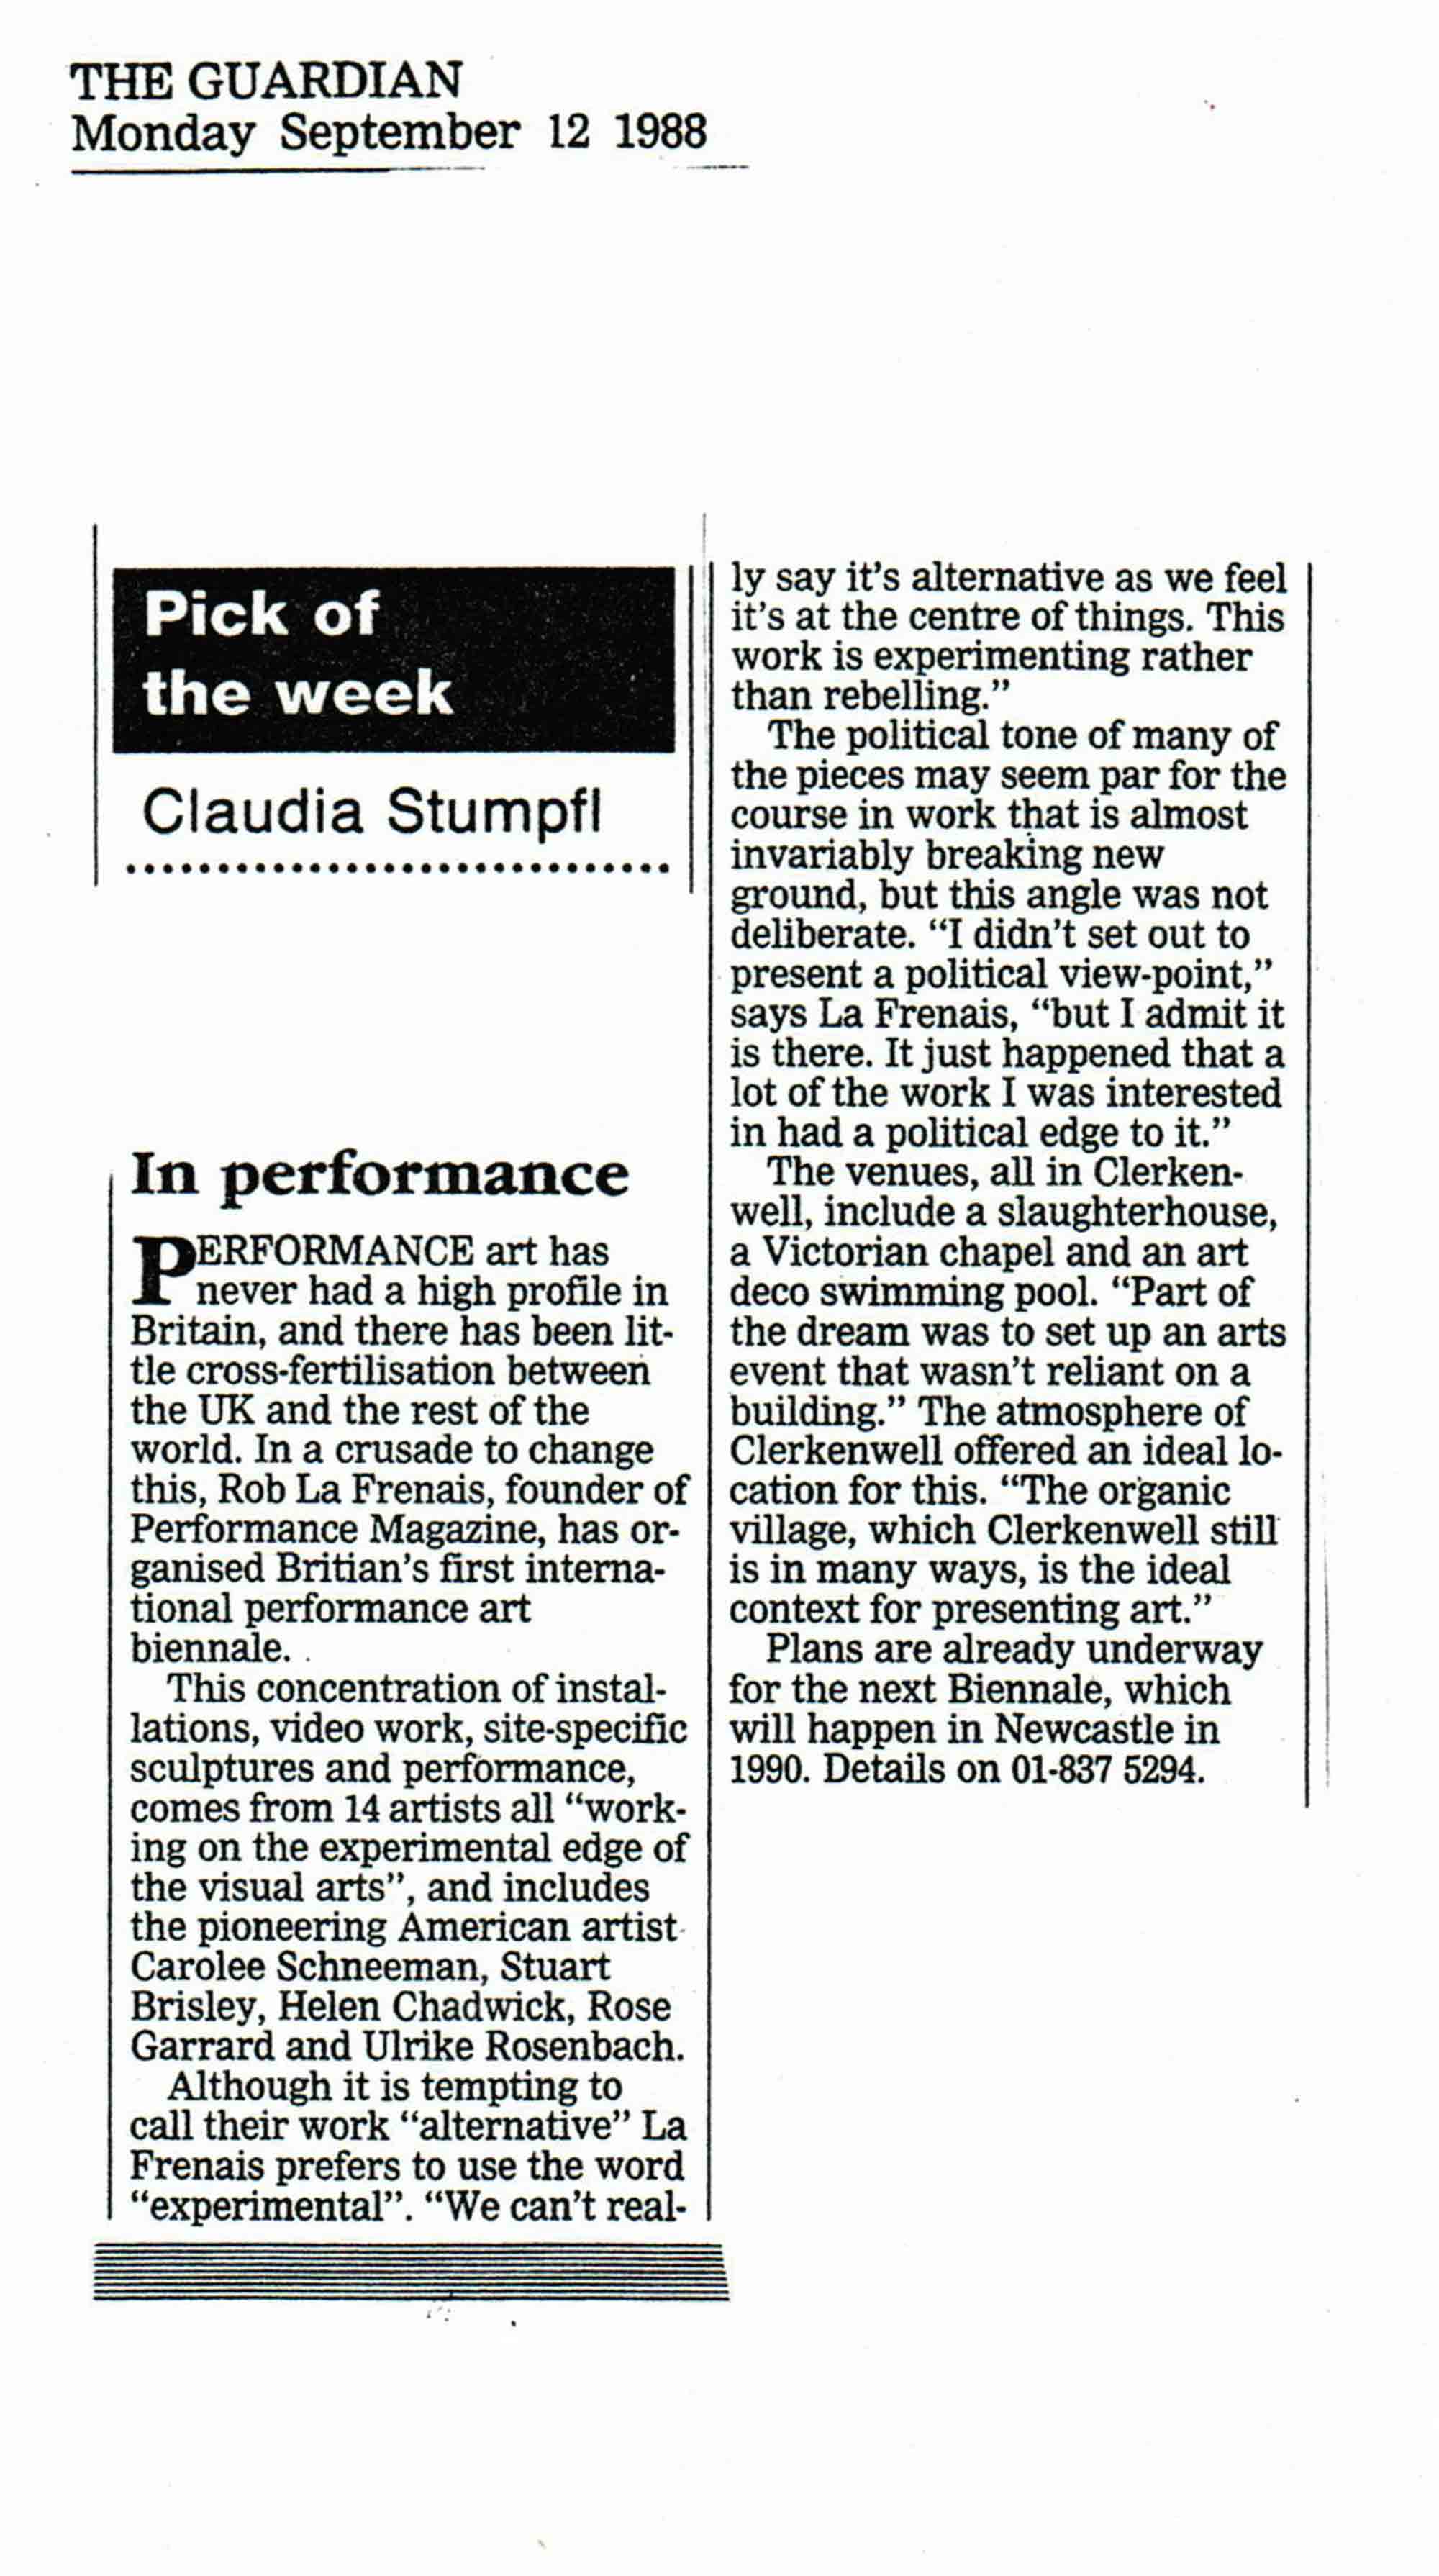 Article by Claudia Stumpfl, Pick of the Week In Performance, EDGE 88, The Guardian, 12 September 1988